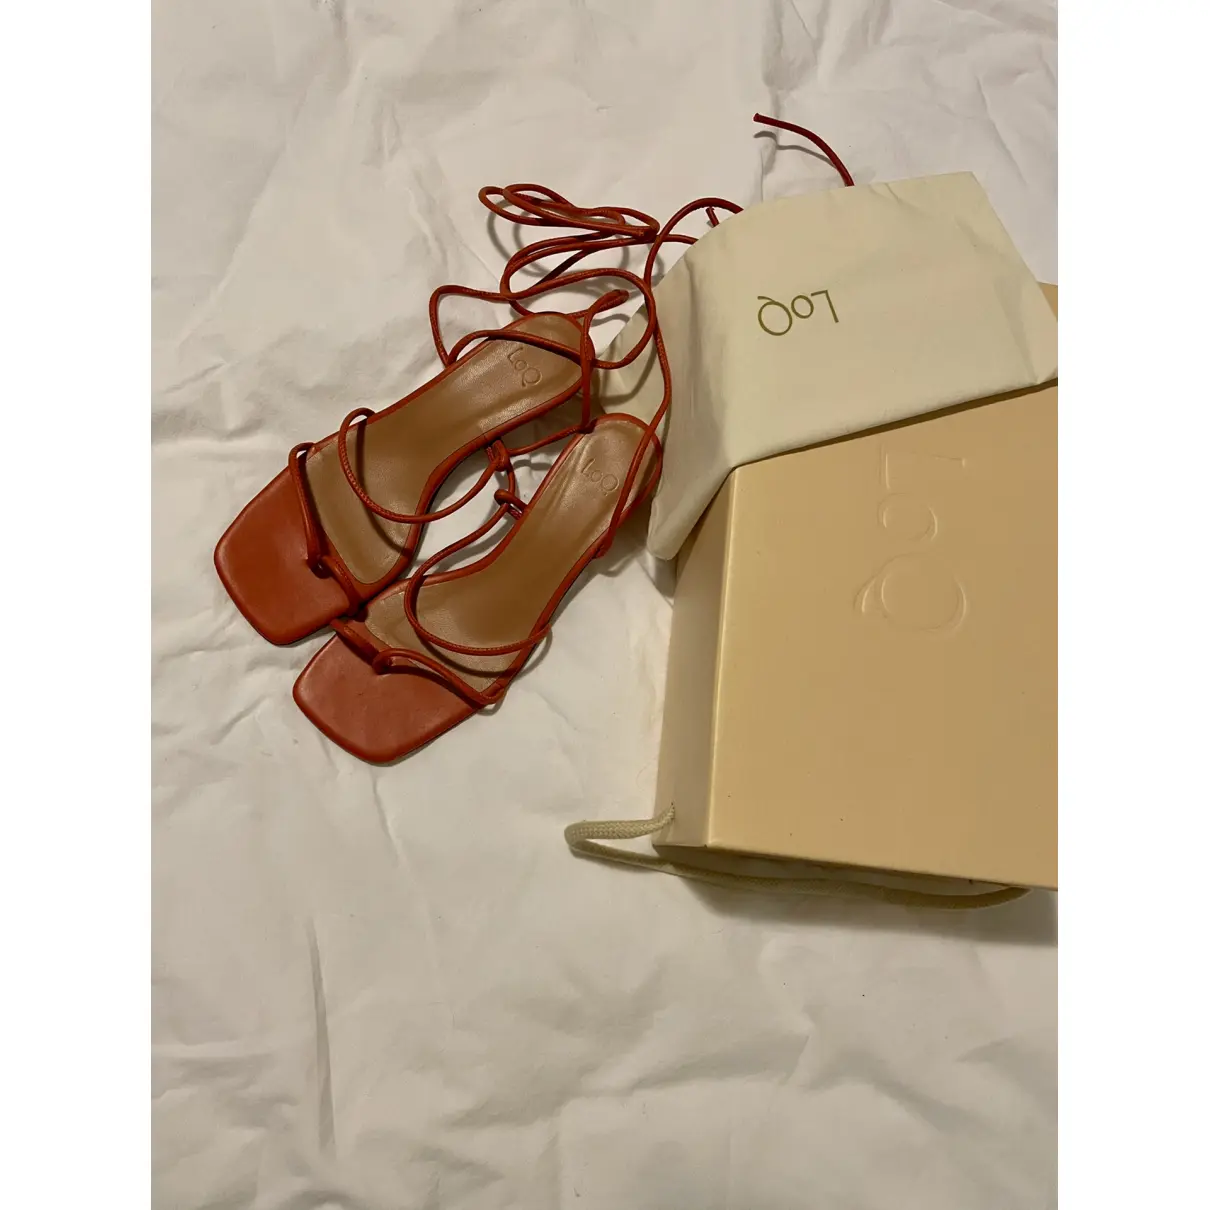 Buy Loq Leather sandal online